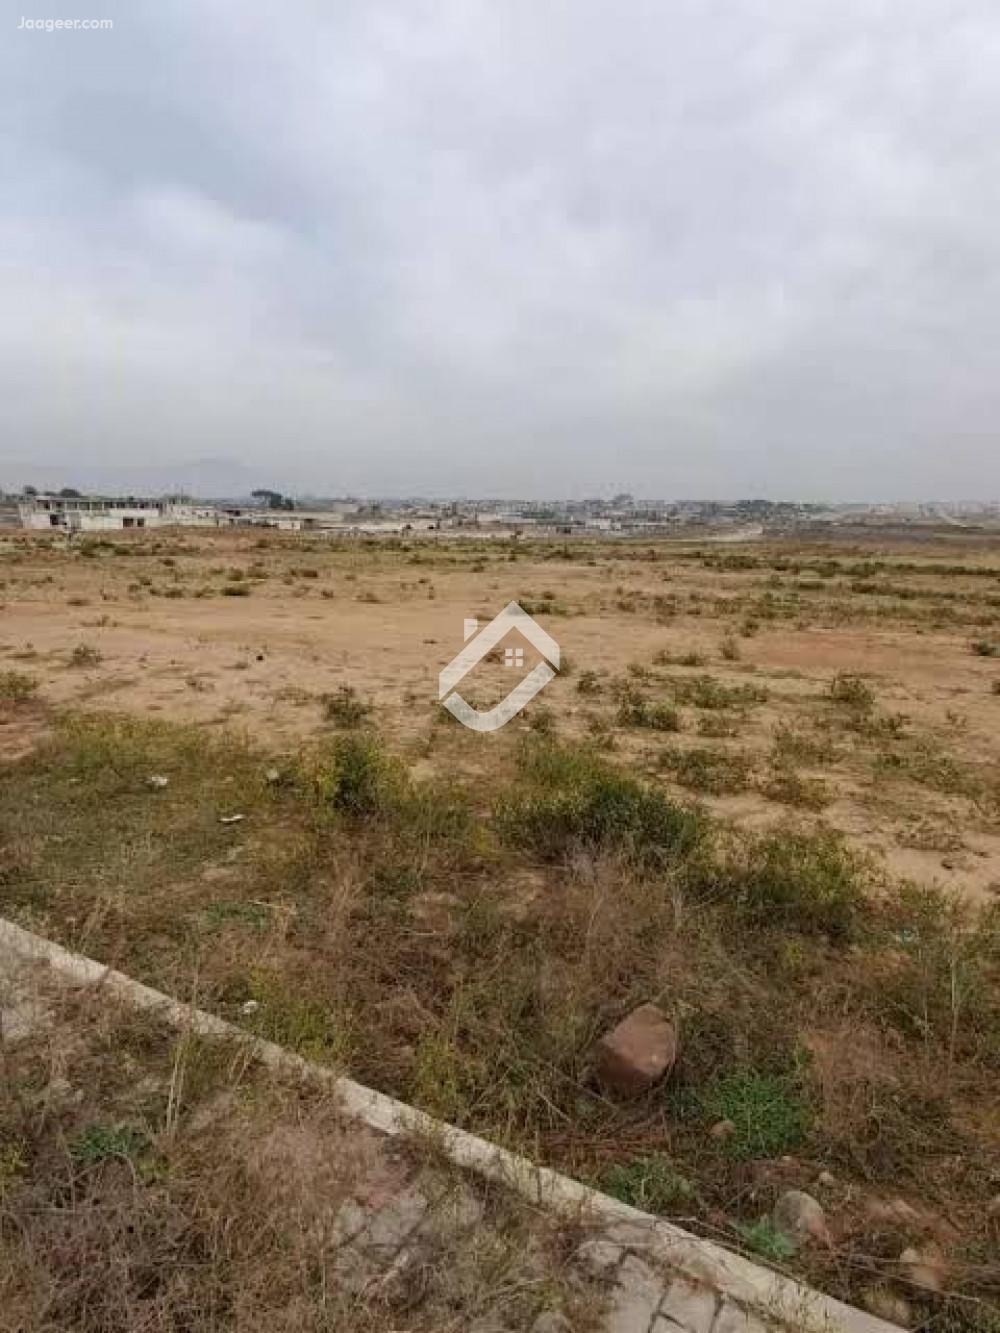 Main image 12.5 Marla Residential Plot For Sale In G 14/3 G-14/3, Islamabad